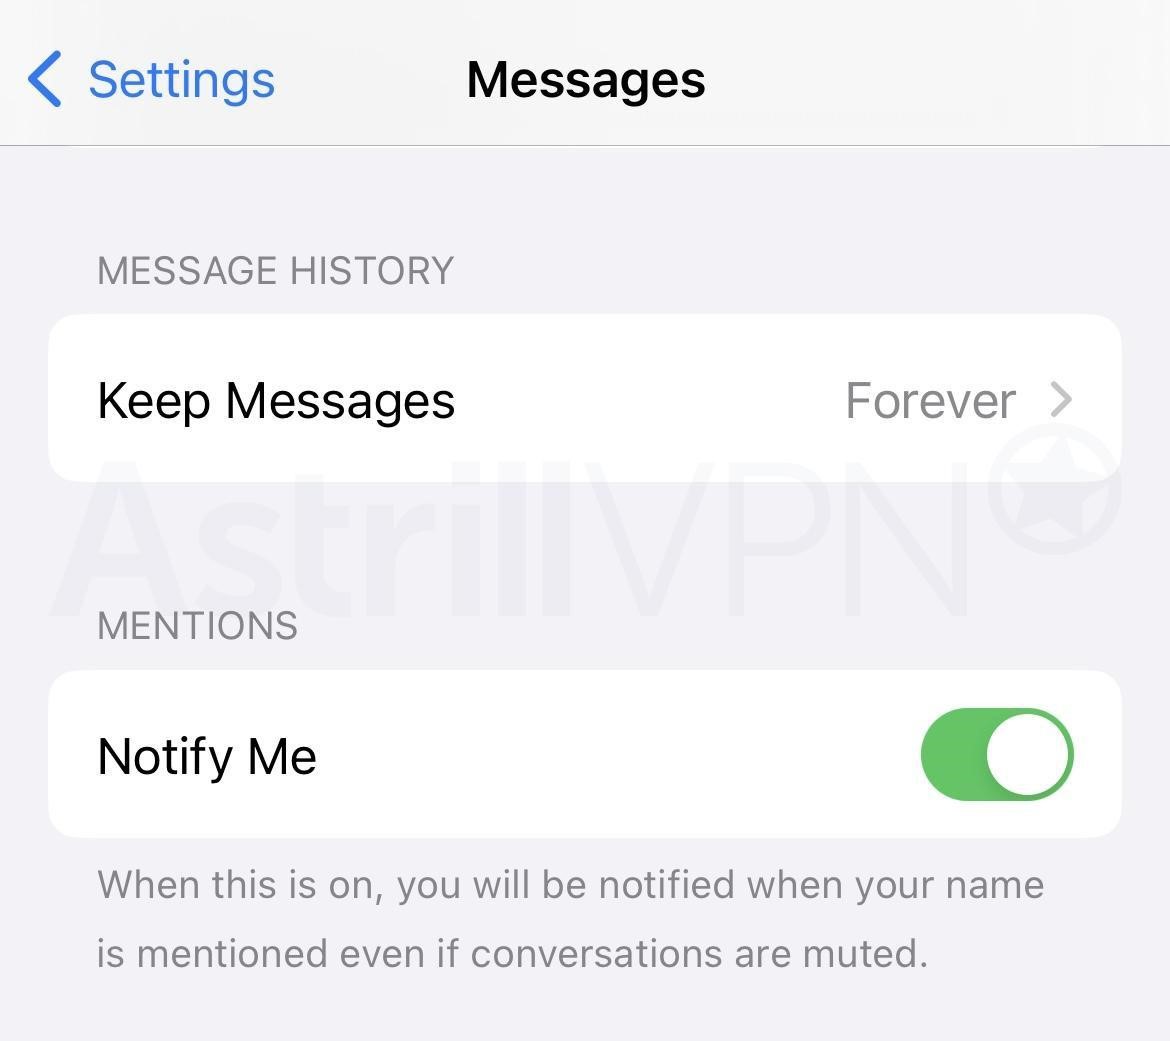 select the Keep Messages 